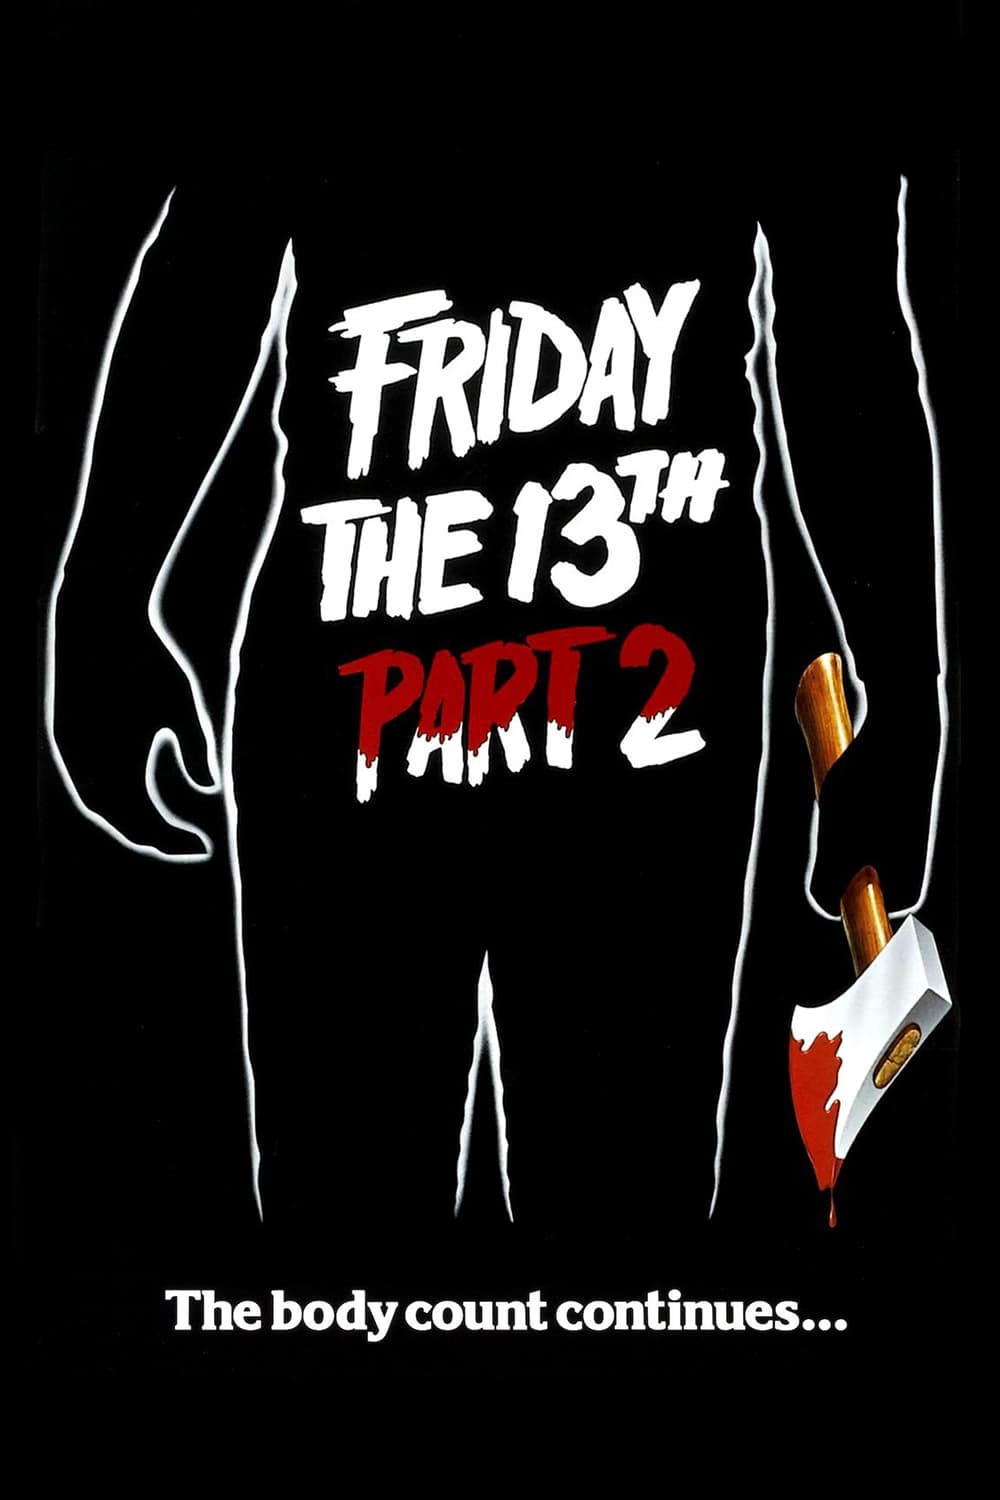 Friday the 13th Part 2 - Wikipedia